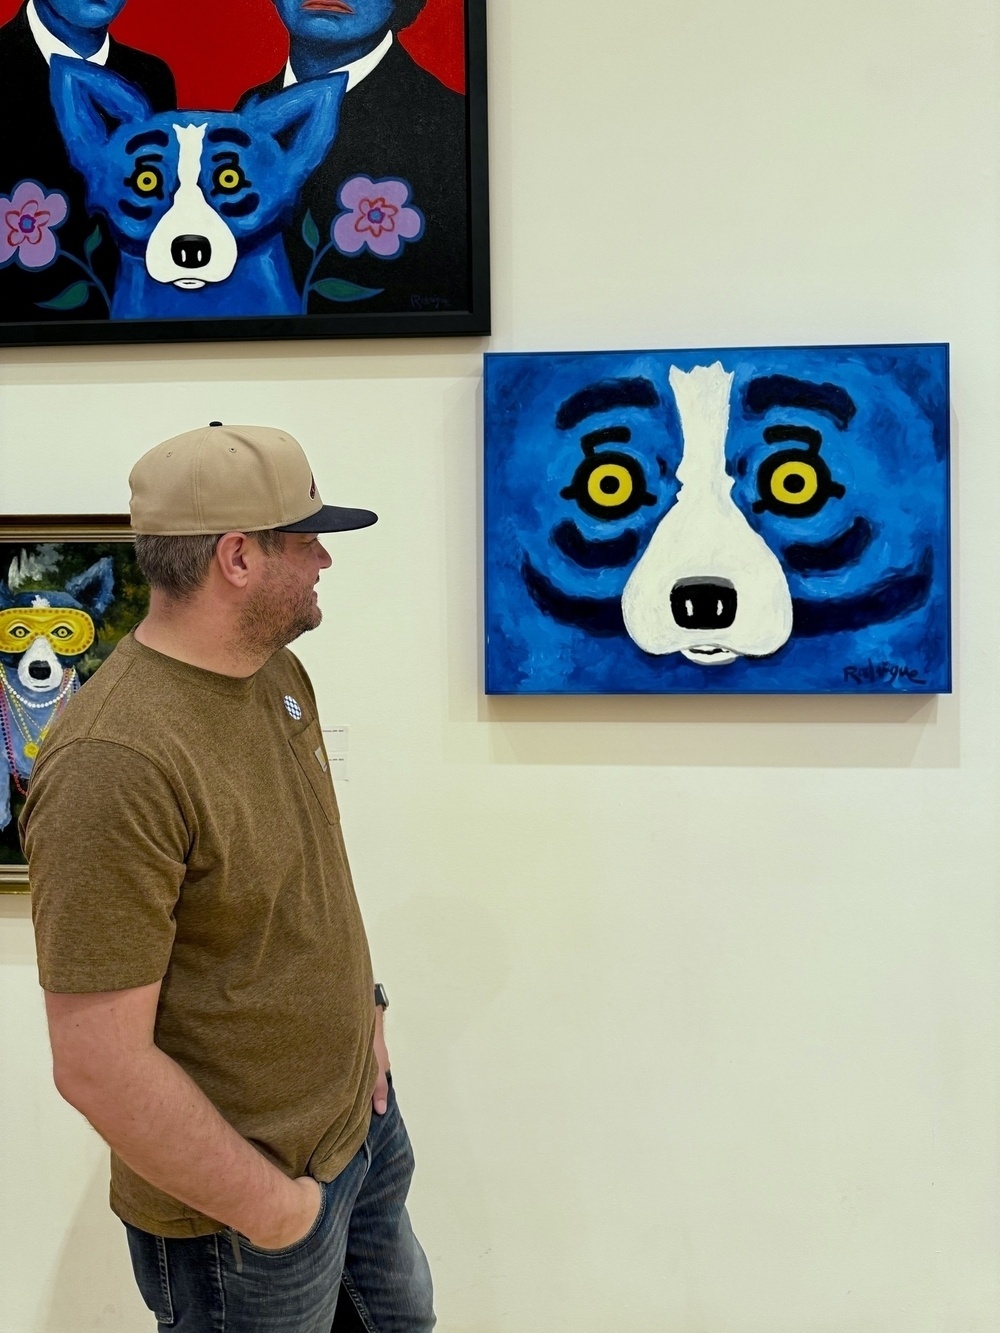 A man wearing a tan cap and brown shirt is looking at a painting of a blue dog with yellow eyes in an art gallery.